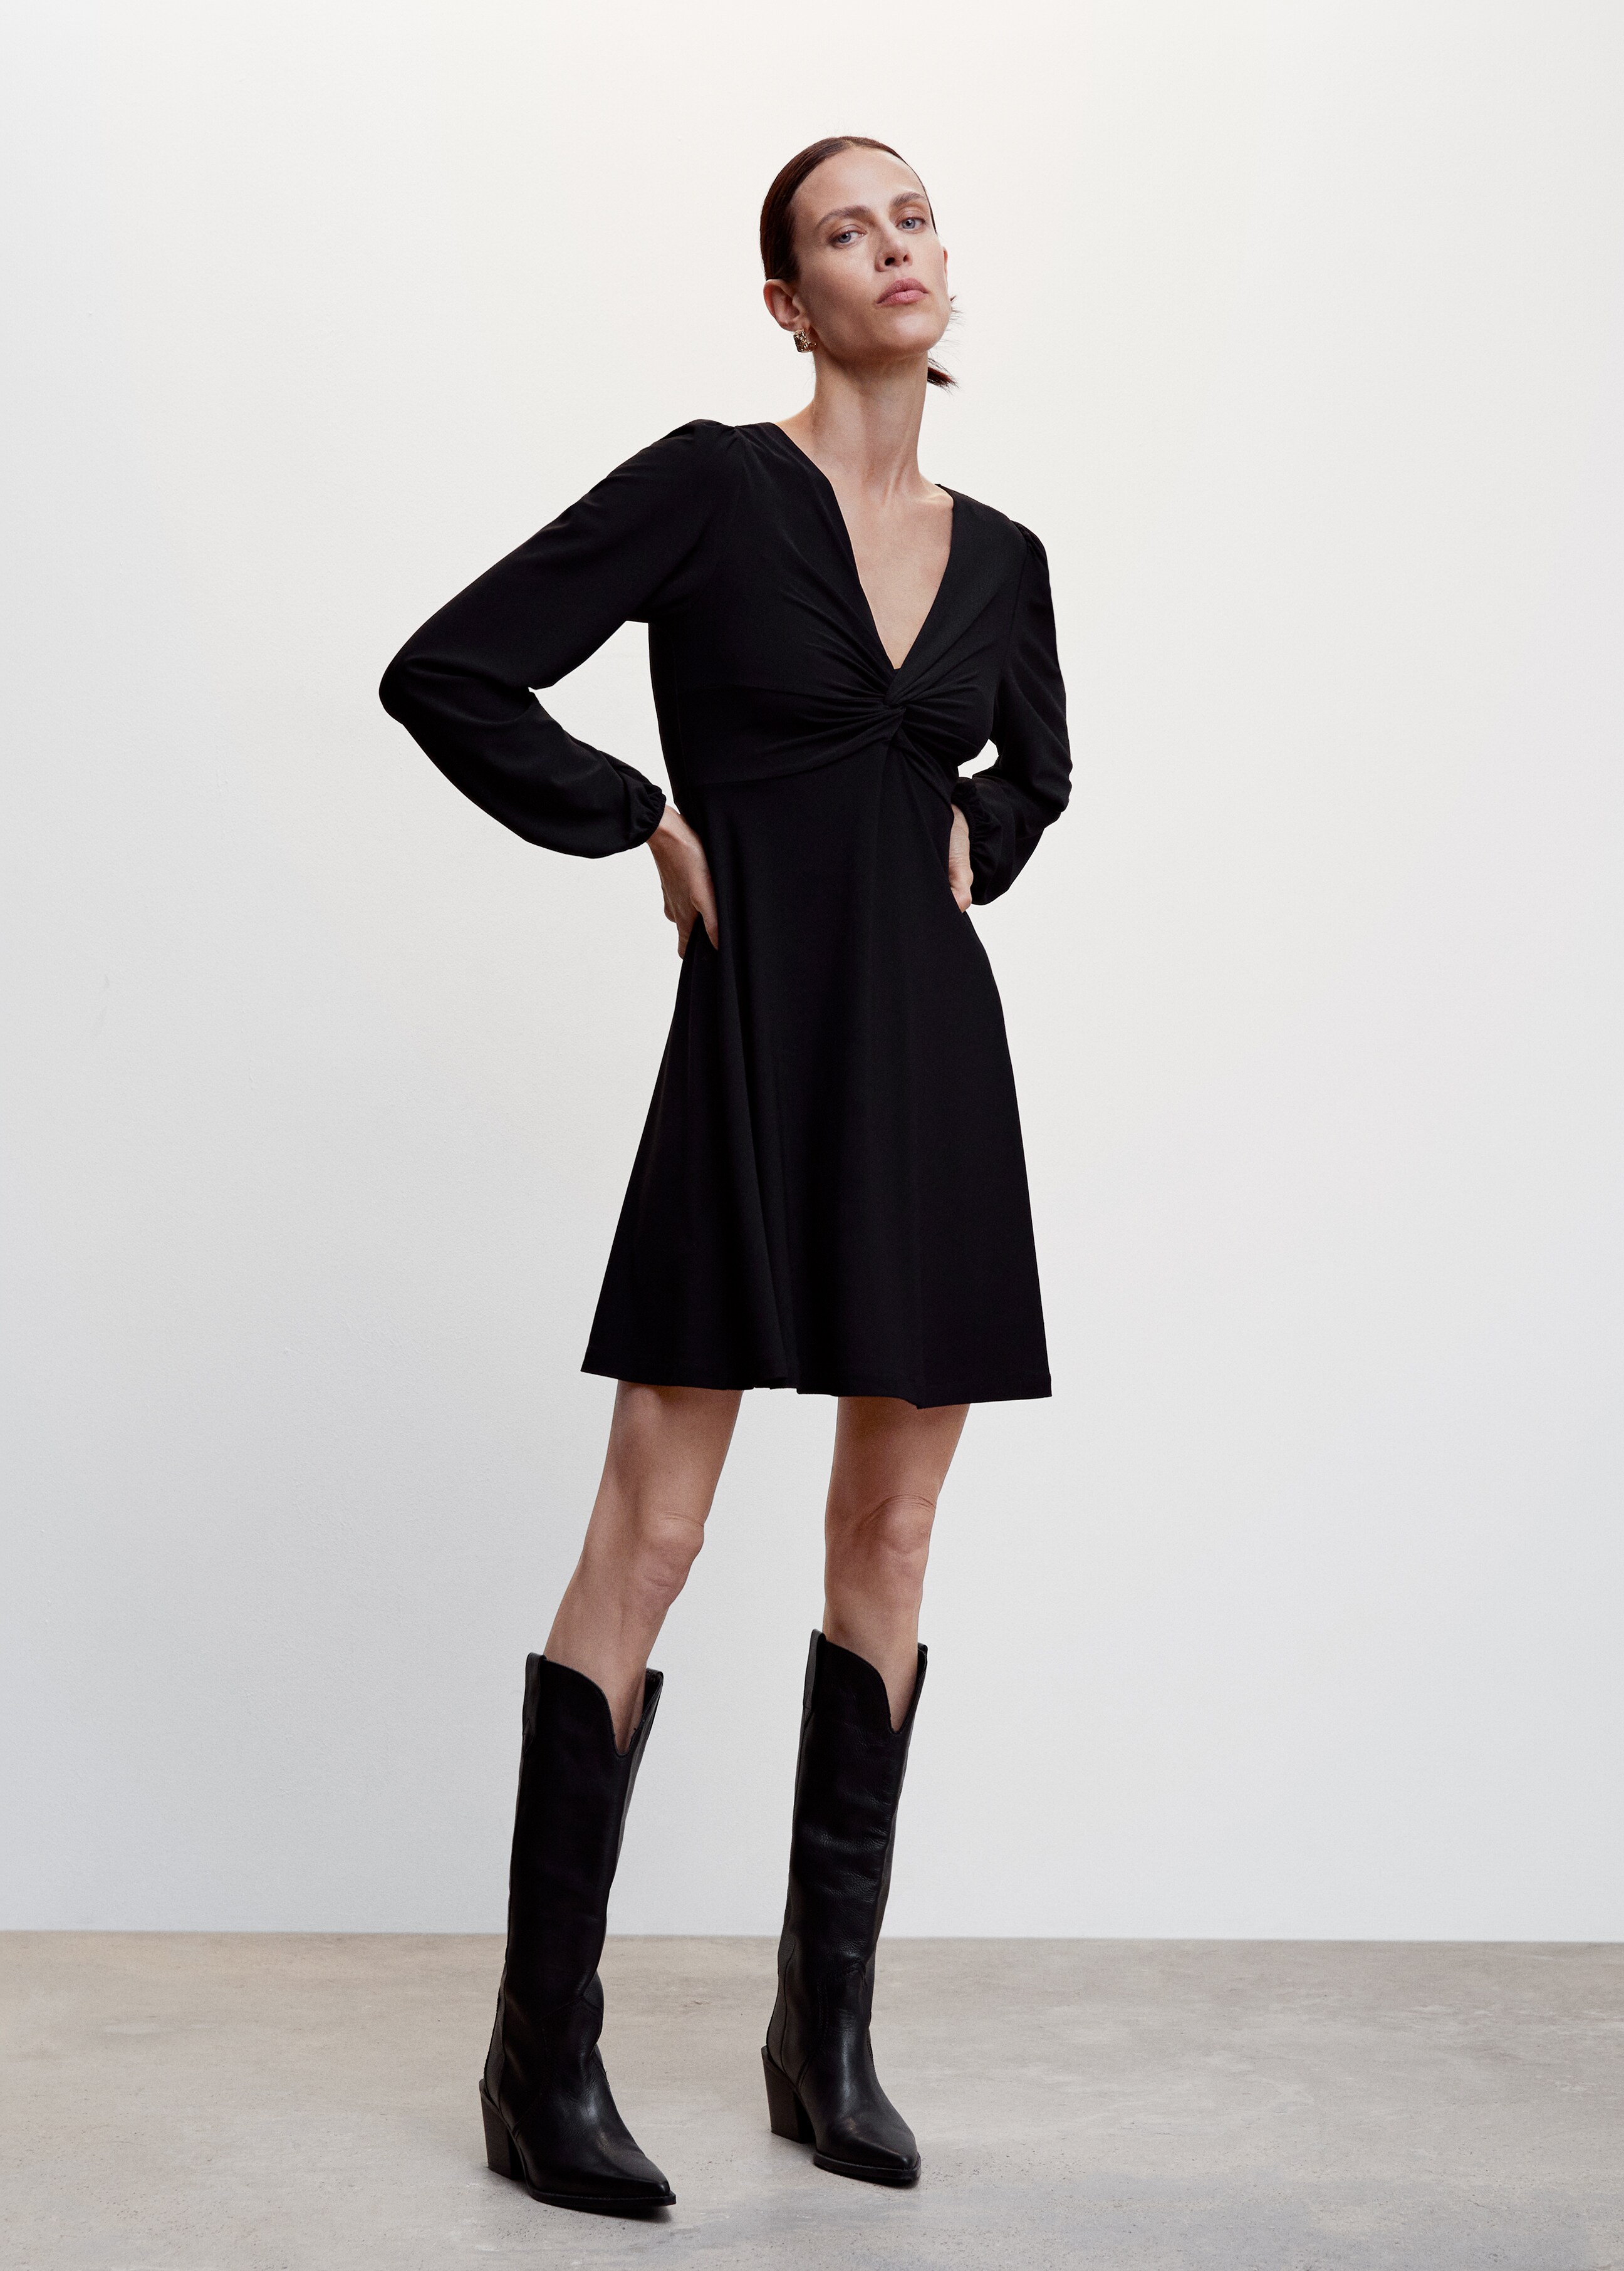 Black dress with knot detail - General plane